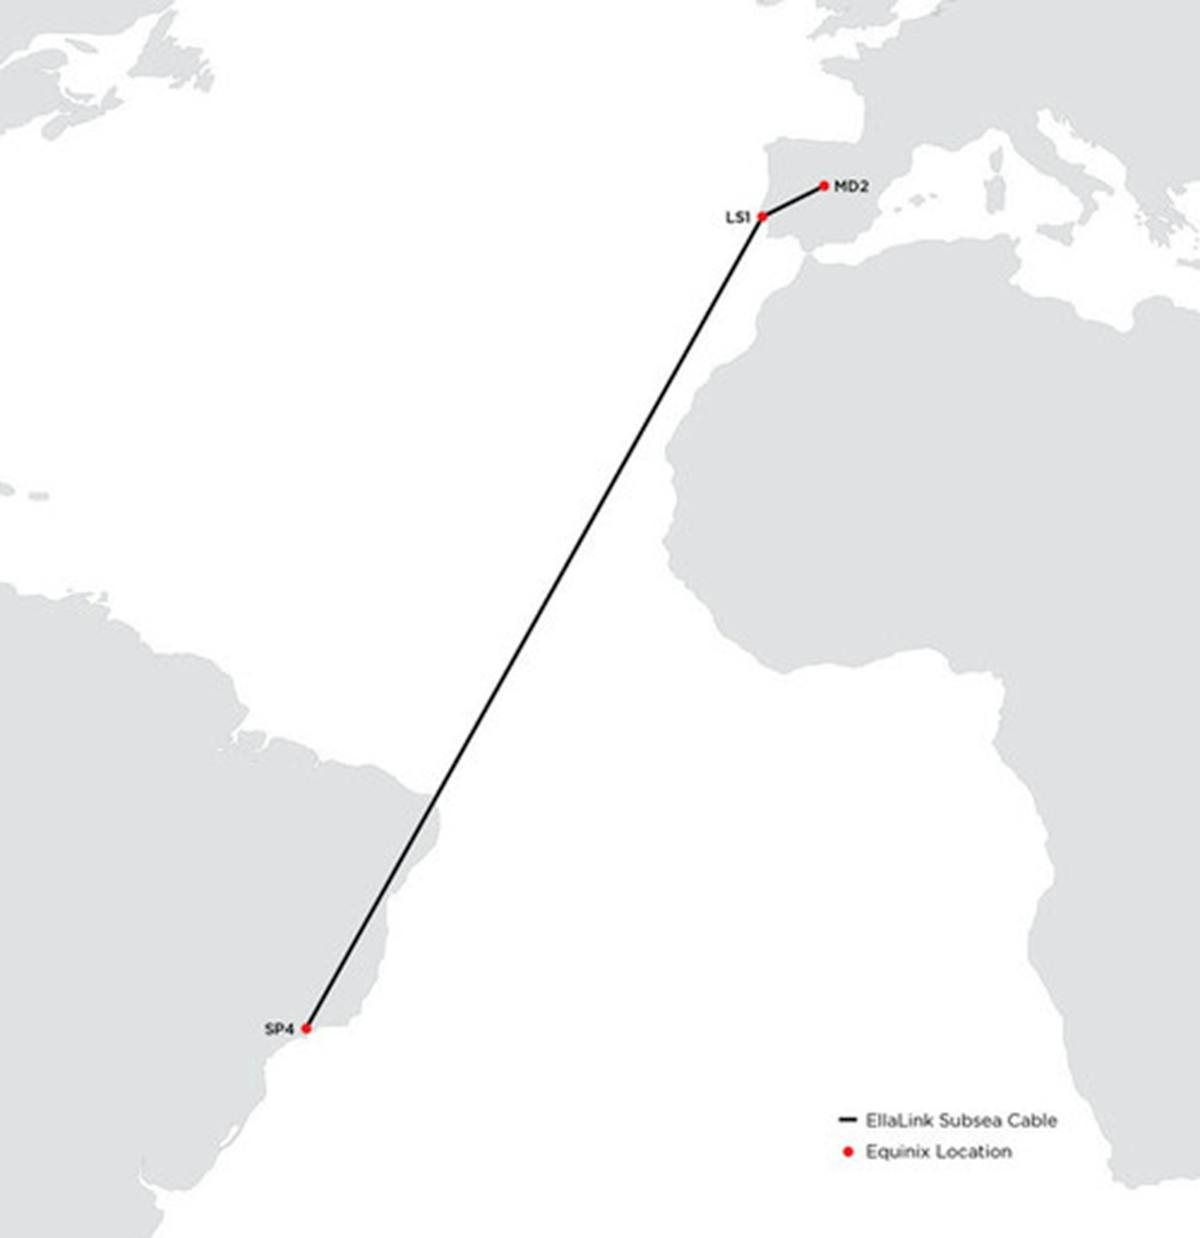 The EllaLink transatlantic submarine cable will leverage data centers from Equinix in Brazil, Portugal, and Spain.